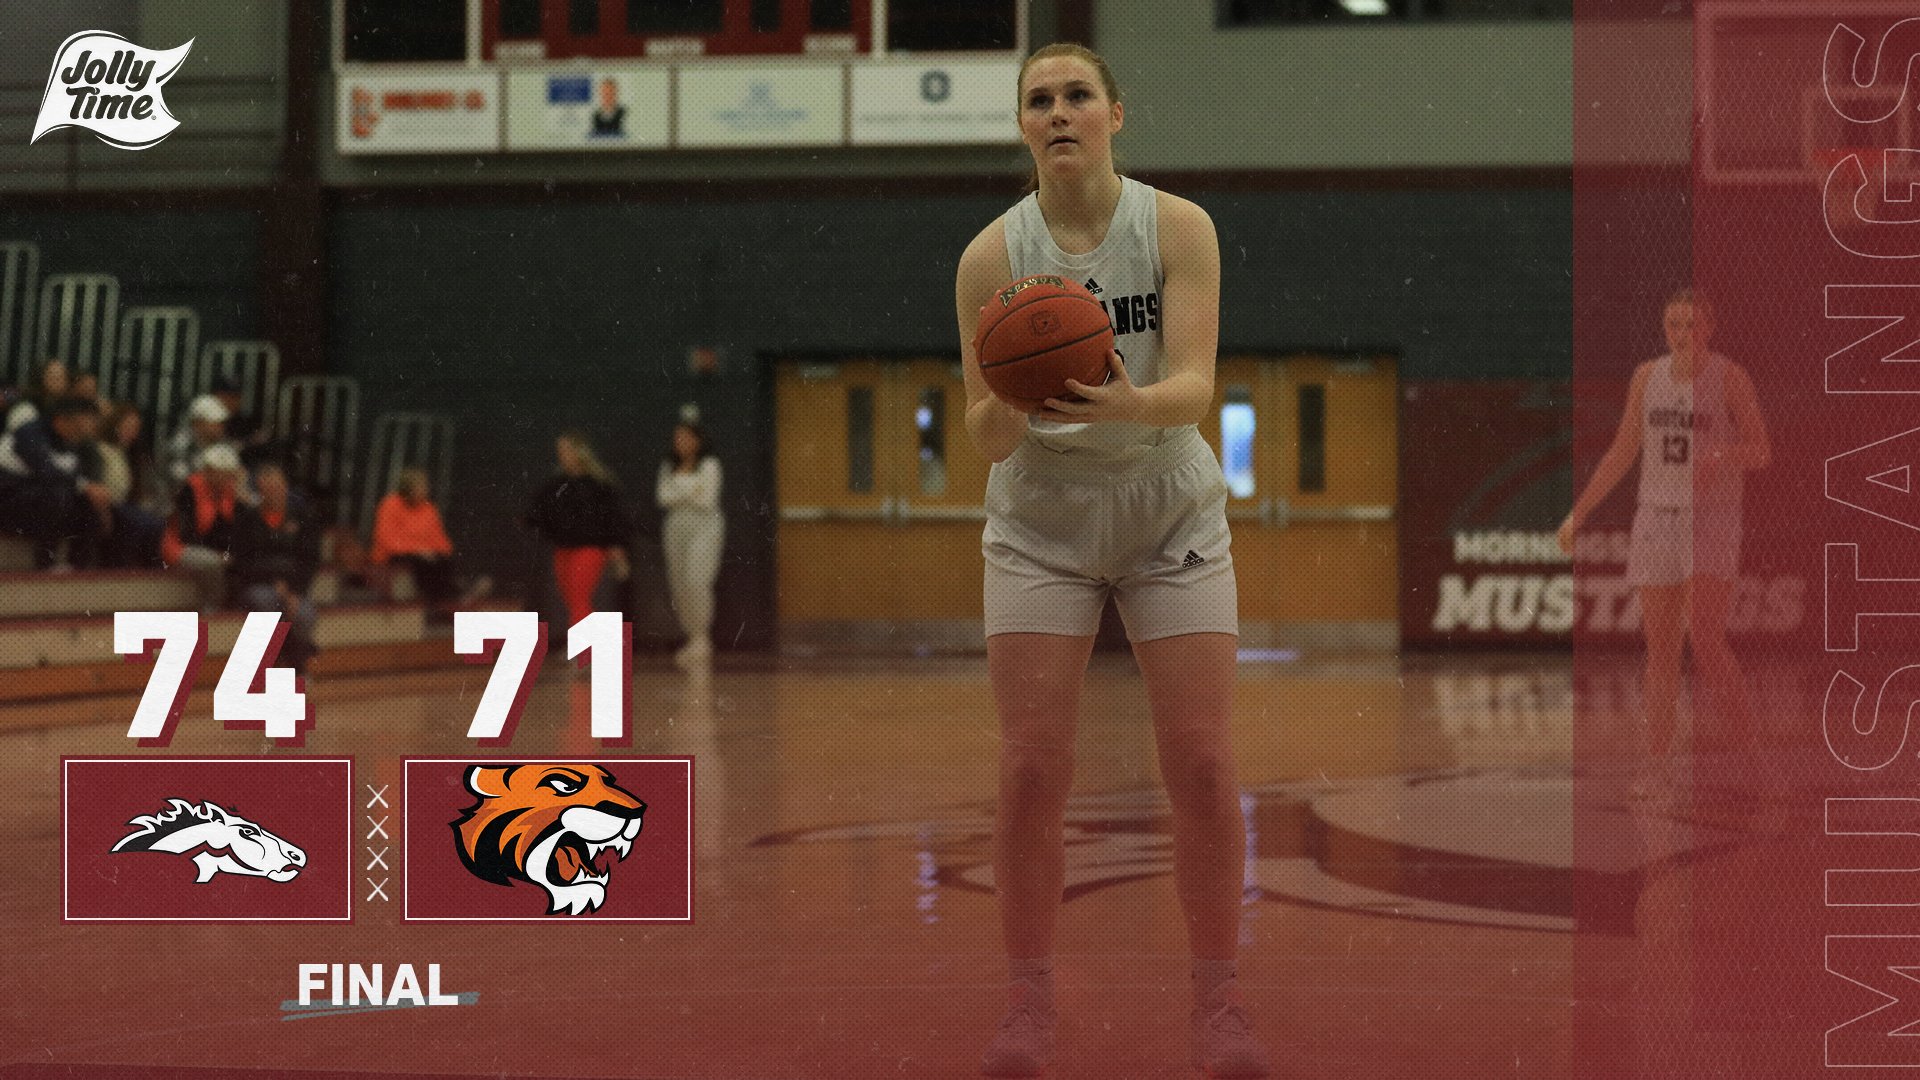 Mustangs lock up tournament spot with win at Doane